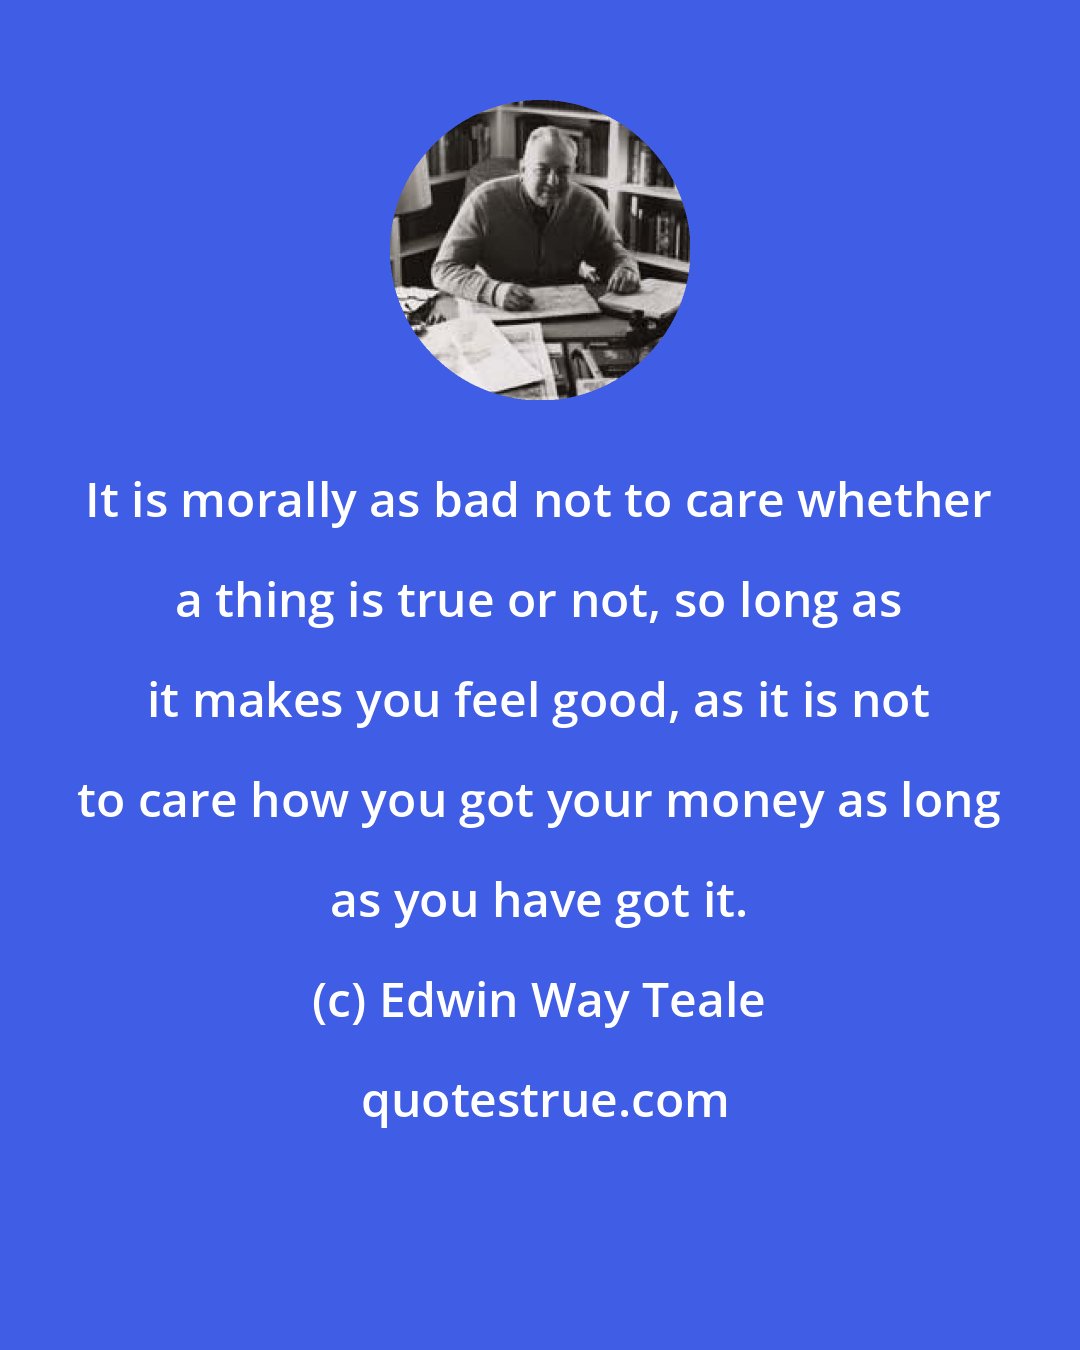 Edwin Way Teale: It is morally as bad not to care whether a thing is true or not, so long as it makes you feel good, as it is not to care how you got your money as long as you have got it.